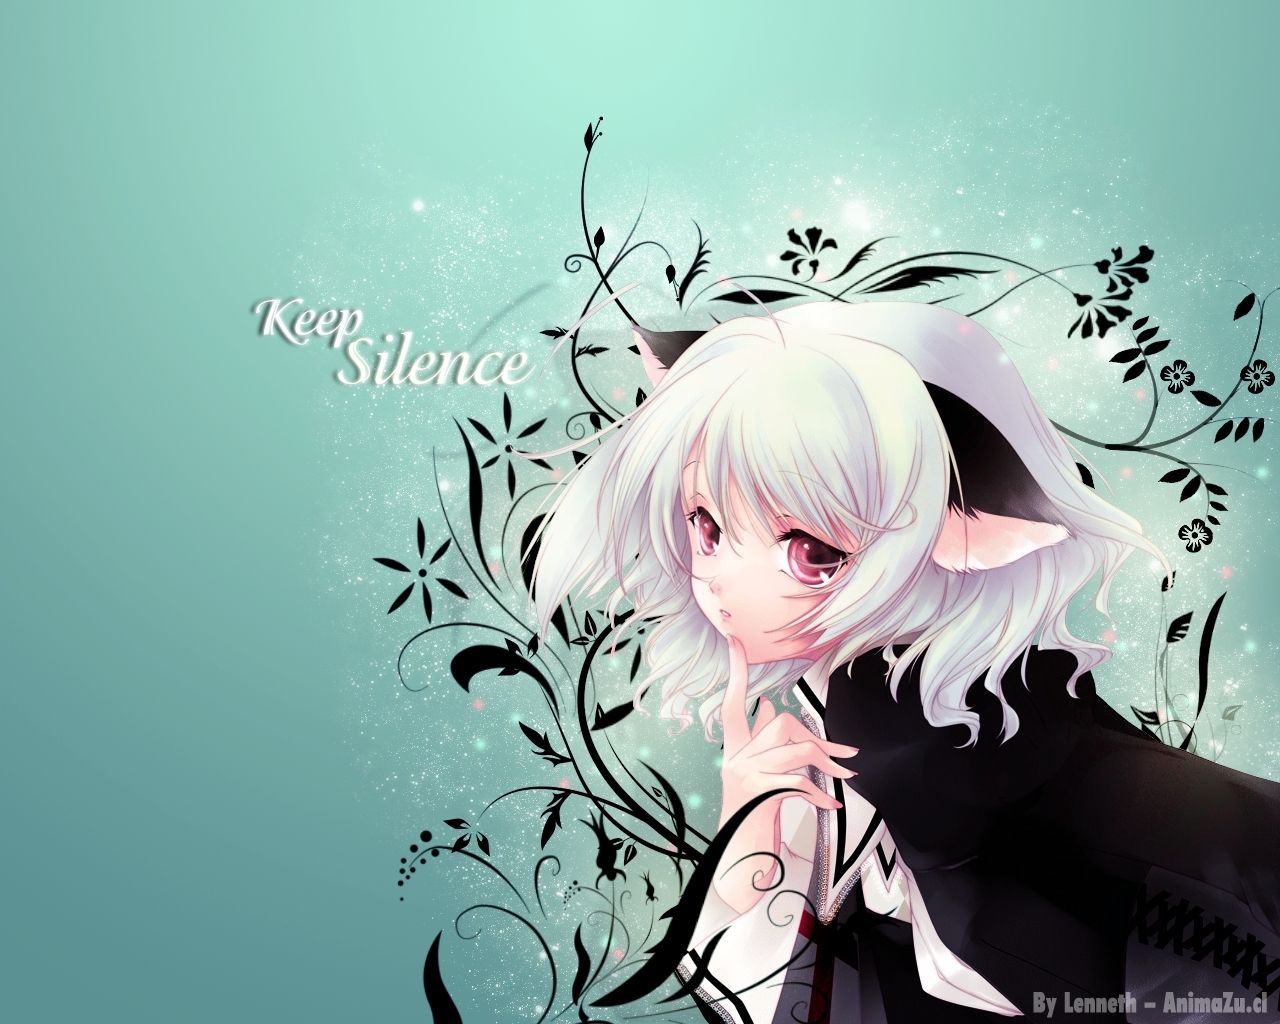 Neko Anime Characters Wallpaper: such beauty. Anime wallpaper download, Anime background wallpaper, Anime background